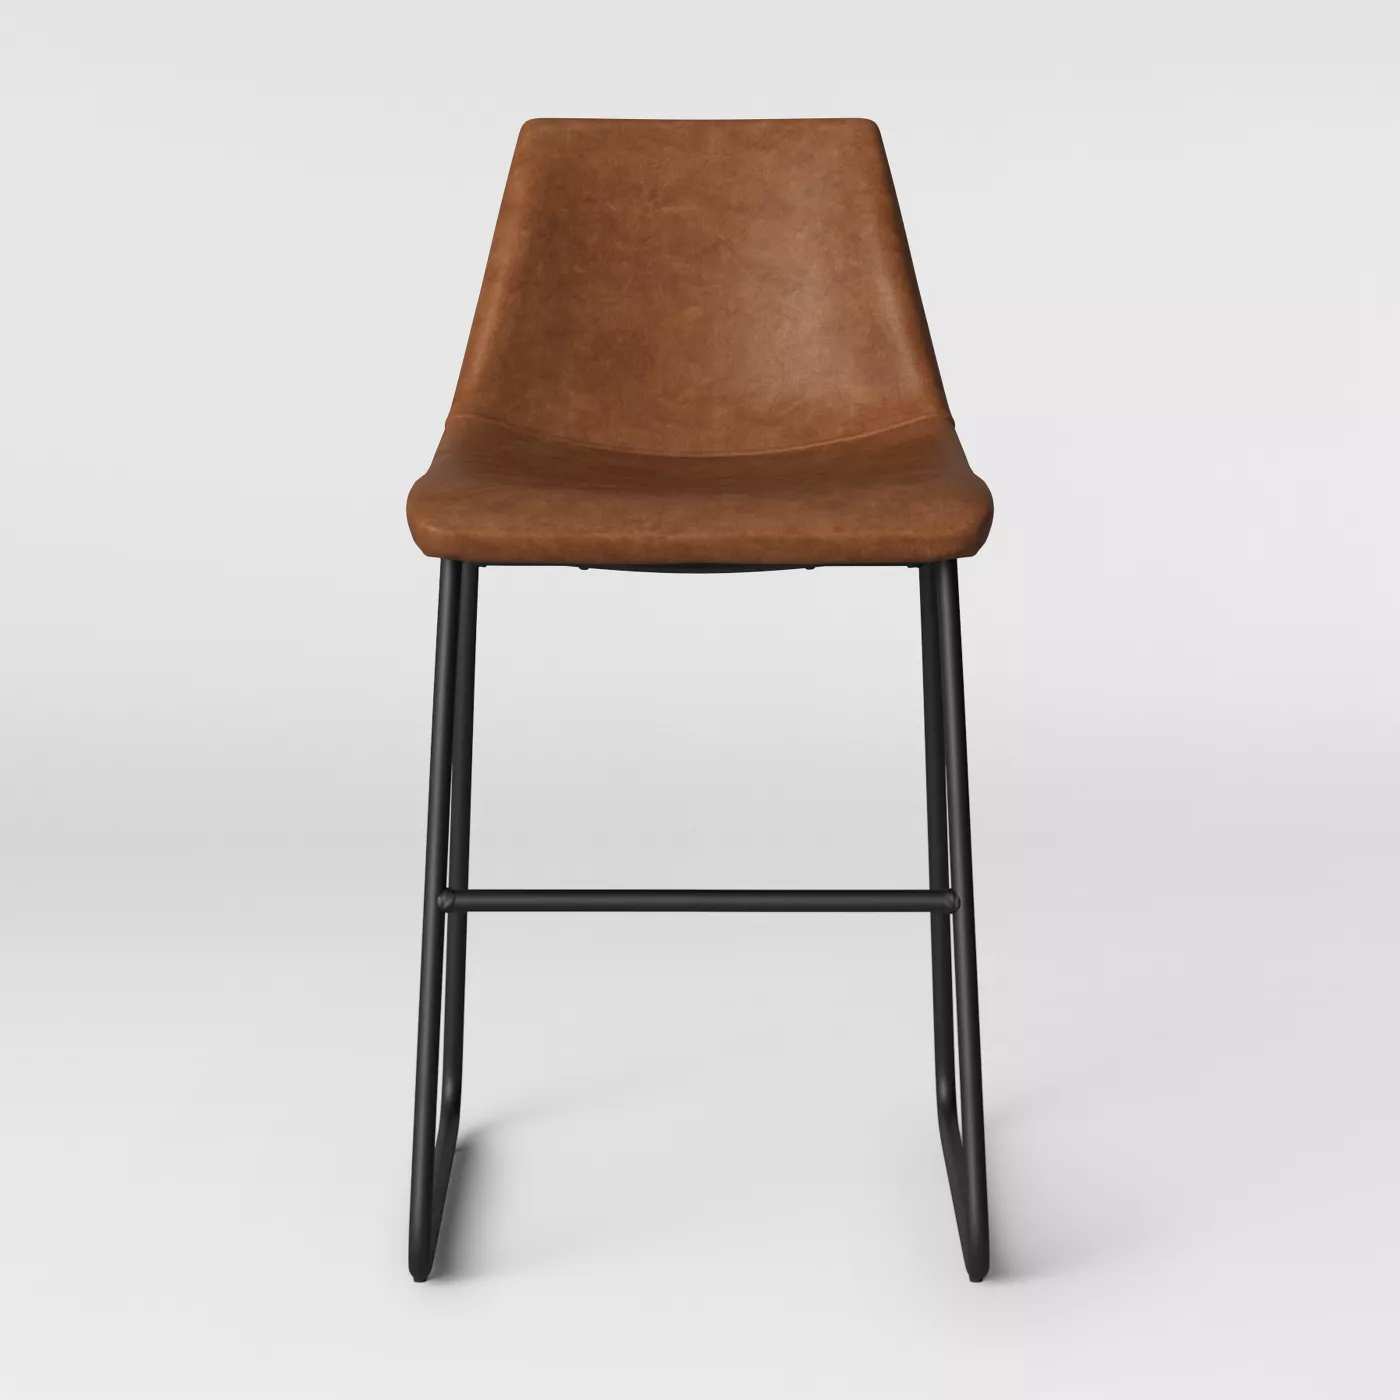 Shop Bowden Upholstered Molded Faux Leather Counter Height Barstool - Project 62™ from Target on Openhaus